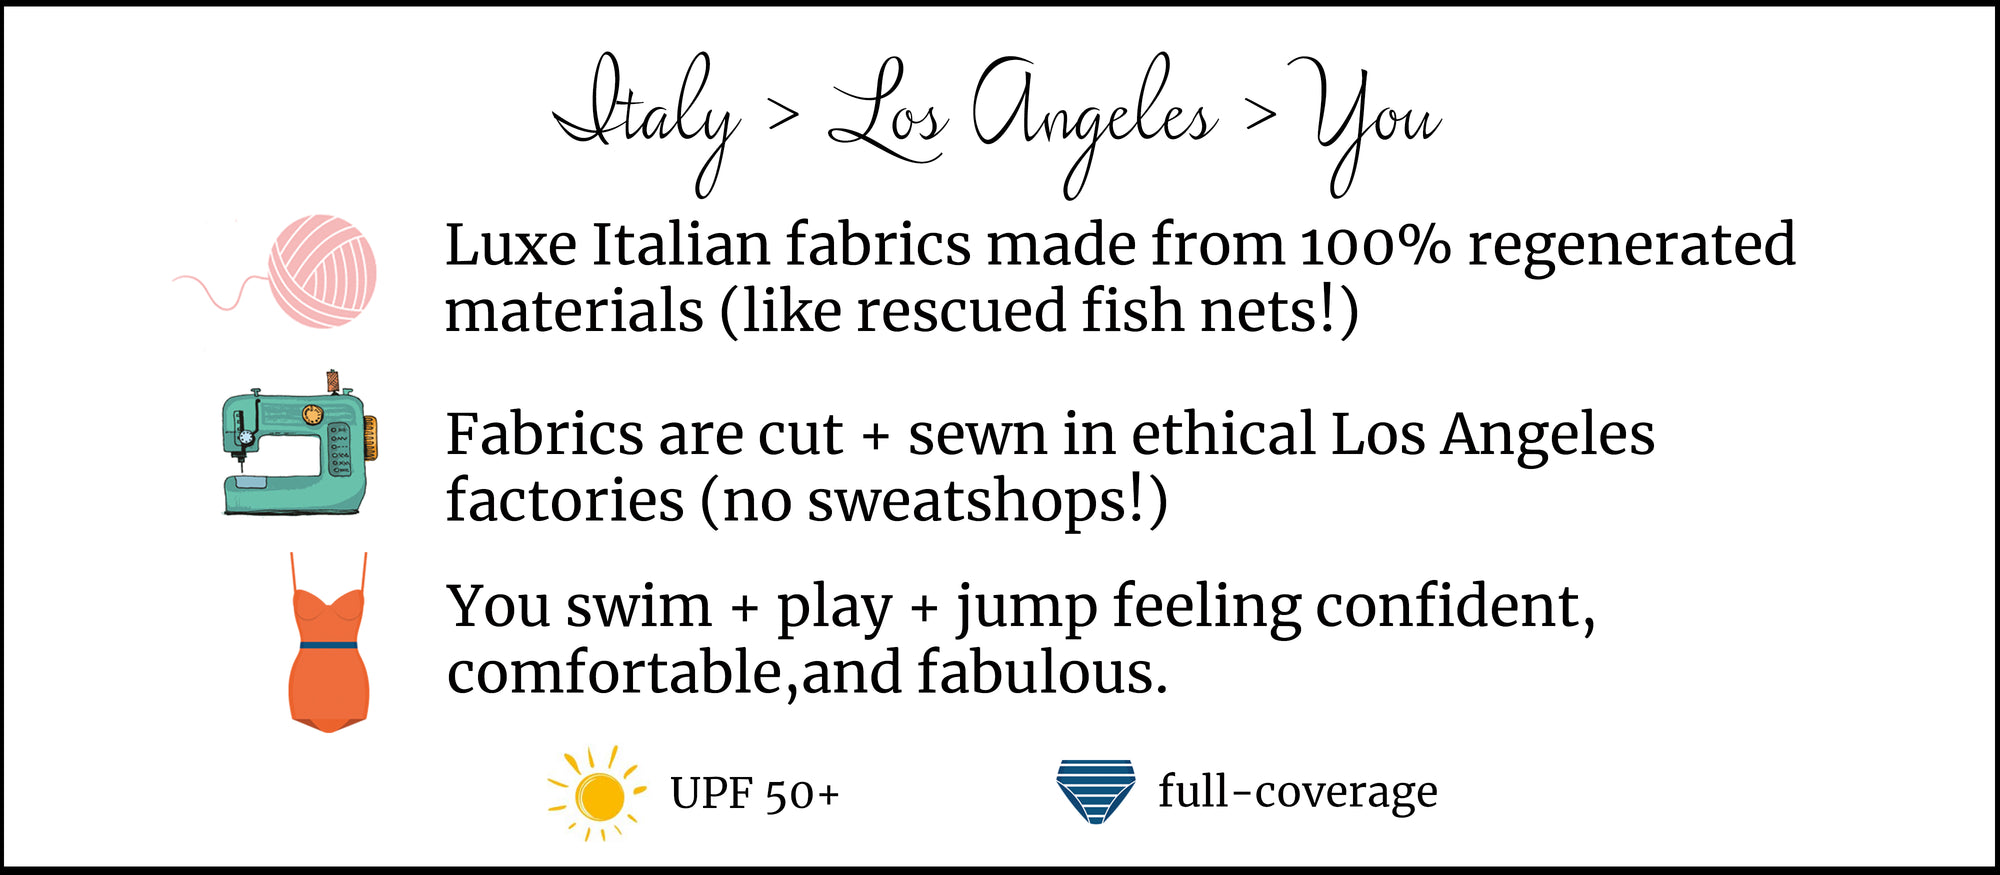 Luxe Italian Fabrics made from 100% regenerated materials! Fabrics are cut + swen in ethical Los Angles factories! You swim + play + jump feeling confident, comfortable, and fabulous. UPF 50+, full-coverage.